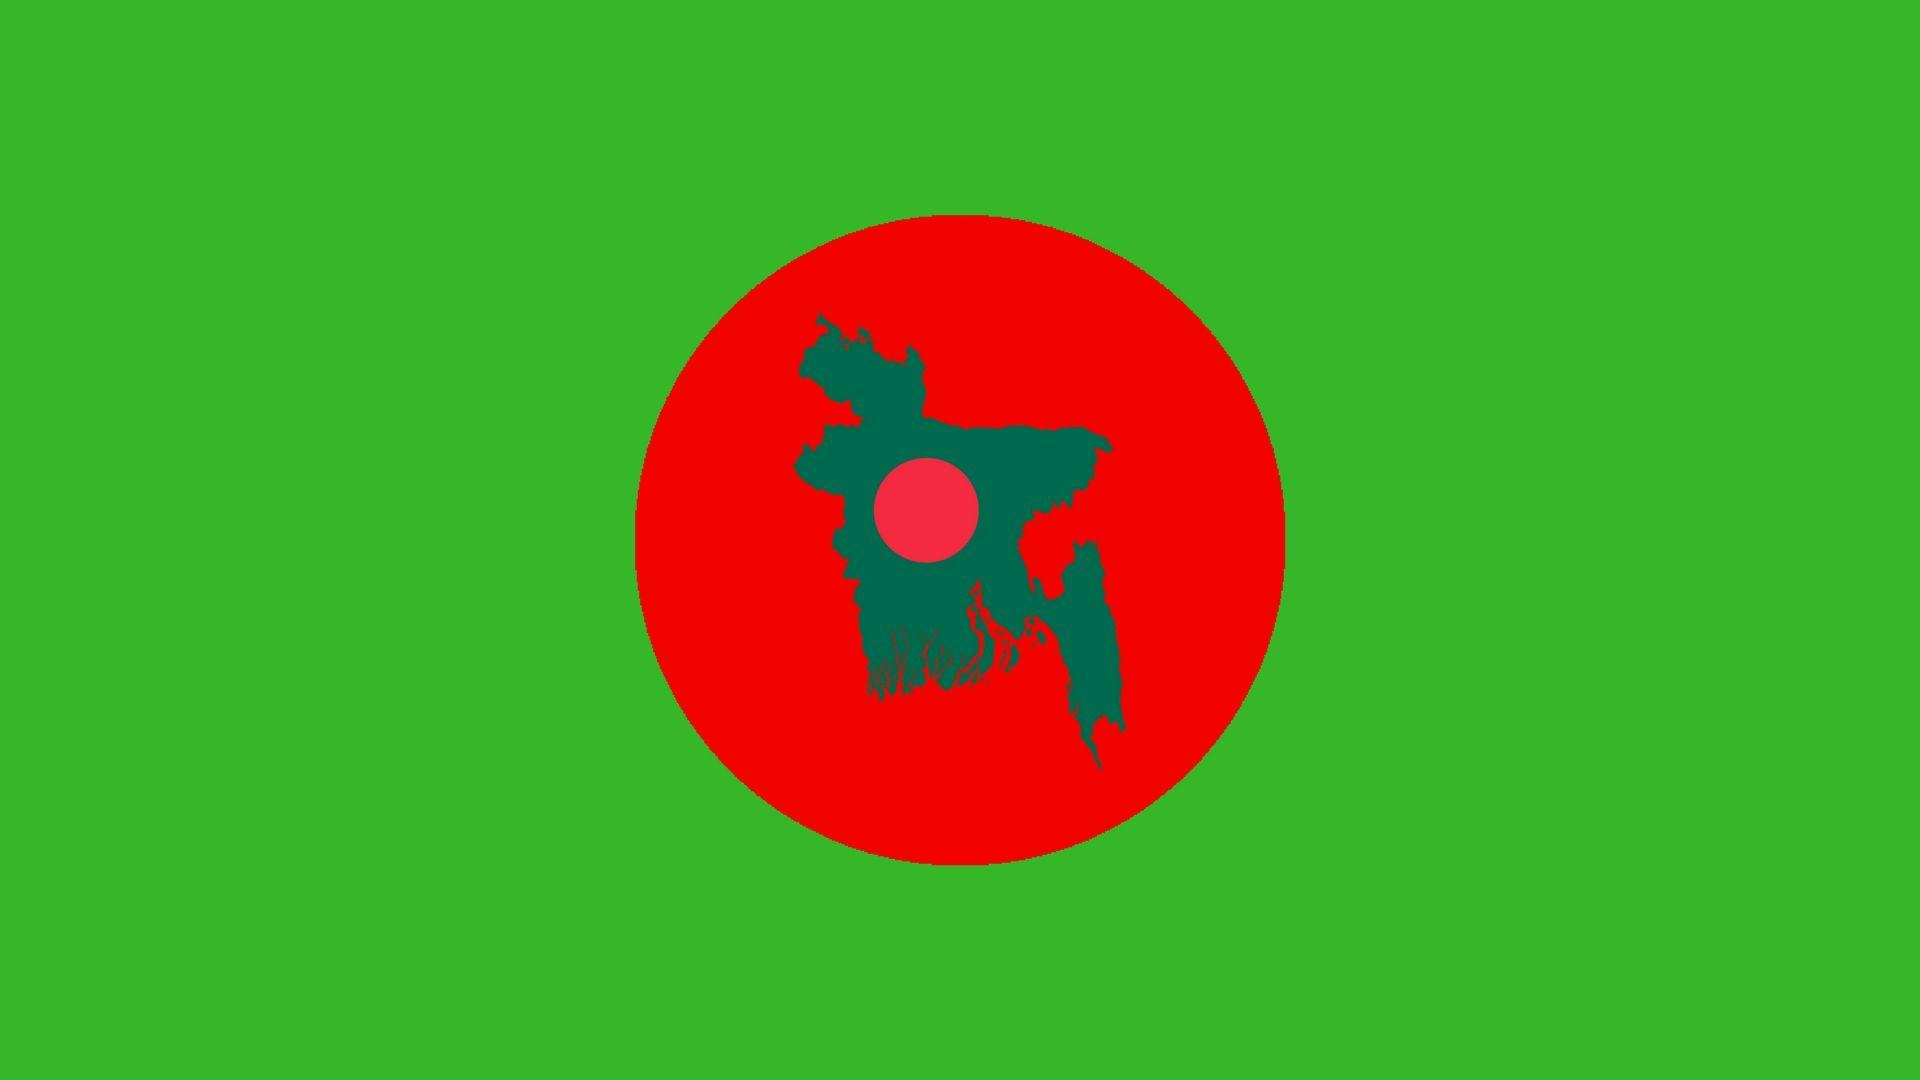 Bangladesh flag live wallpaper:Amazon.co.uk:Appstore for Android